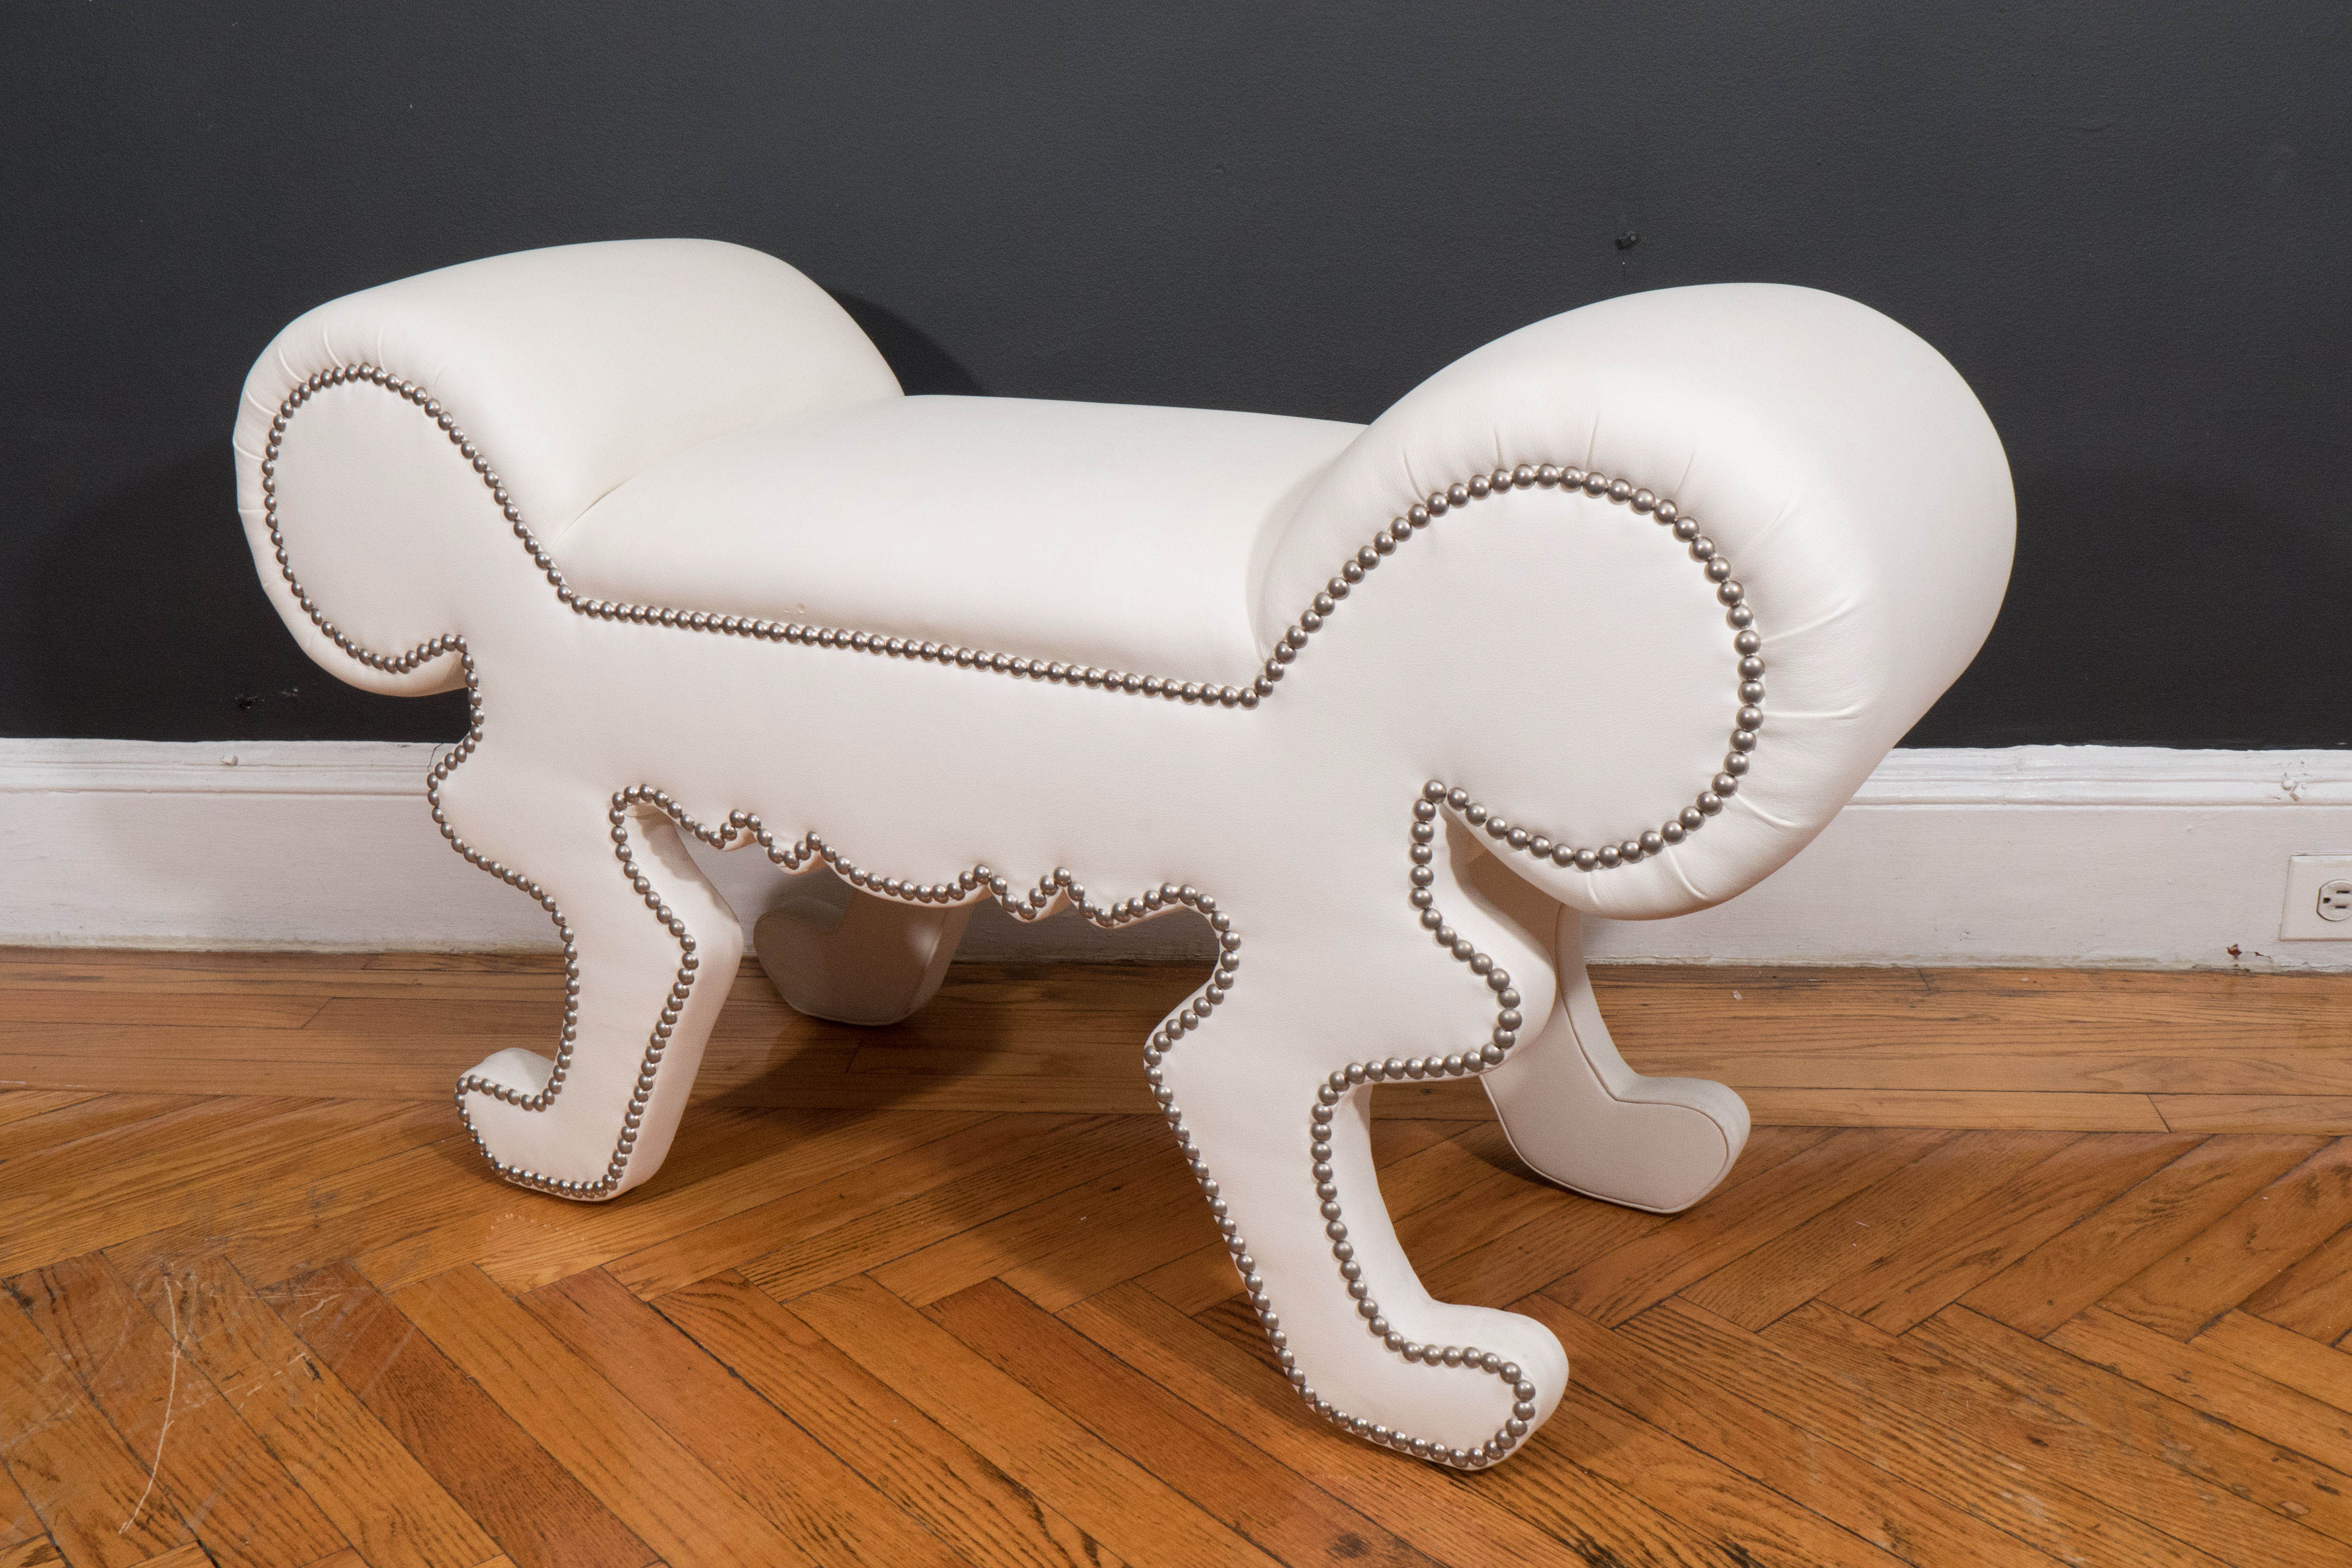 Whimsical bench in white faux leather. This is a floor model that is available as is for immediate purchase. Some wear and blemishes on the upholstery. Additional photos of the recent condition available, and also reupholstery quote can be provided